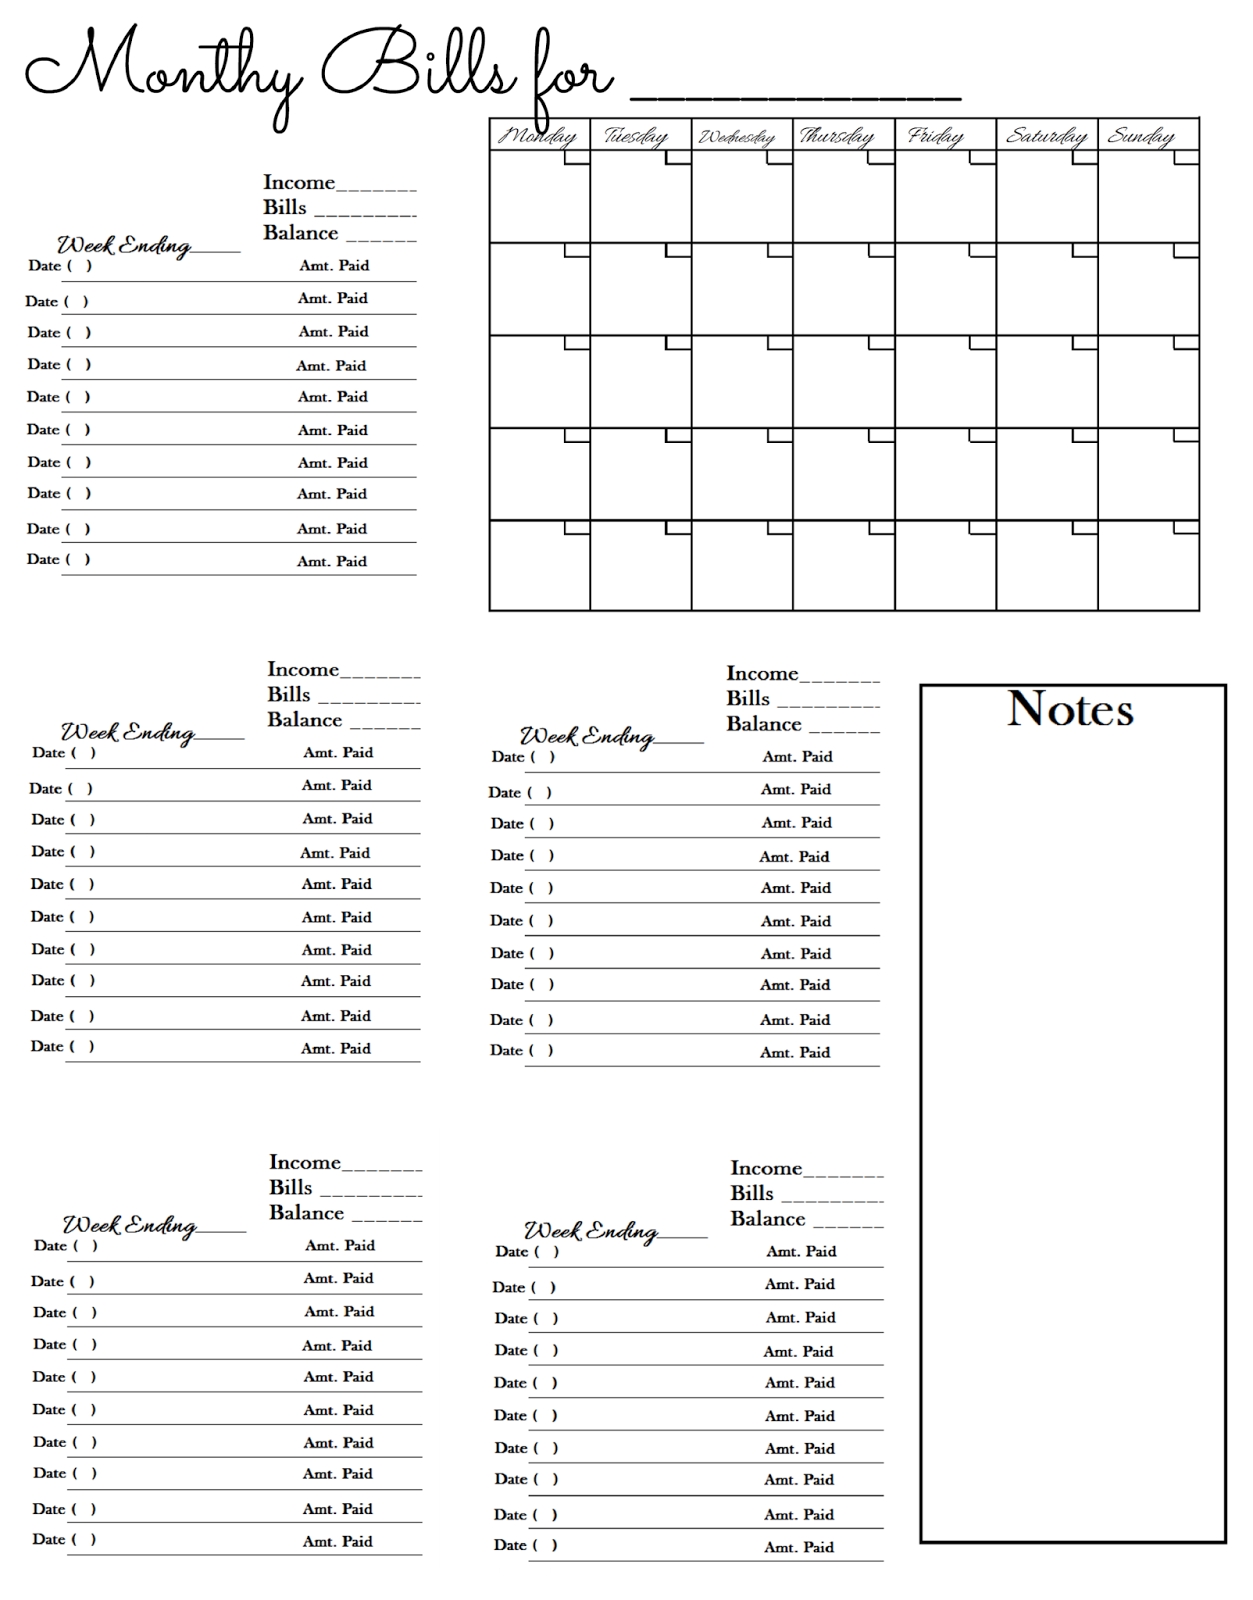 Glenda&#039;s World : Worksheet To Keep Track Of Paid Monthly Bills  Bills Paid In And Out Sheet